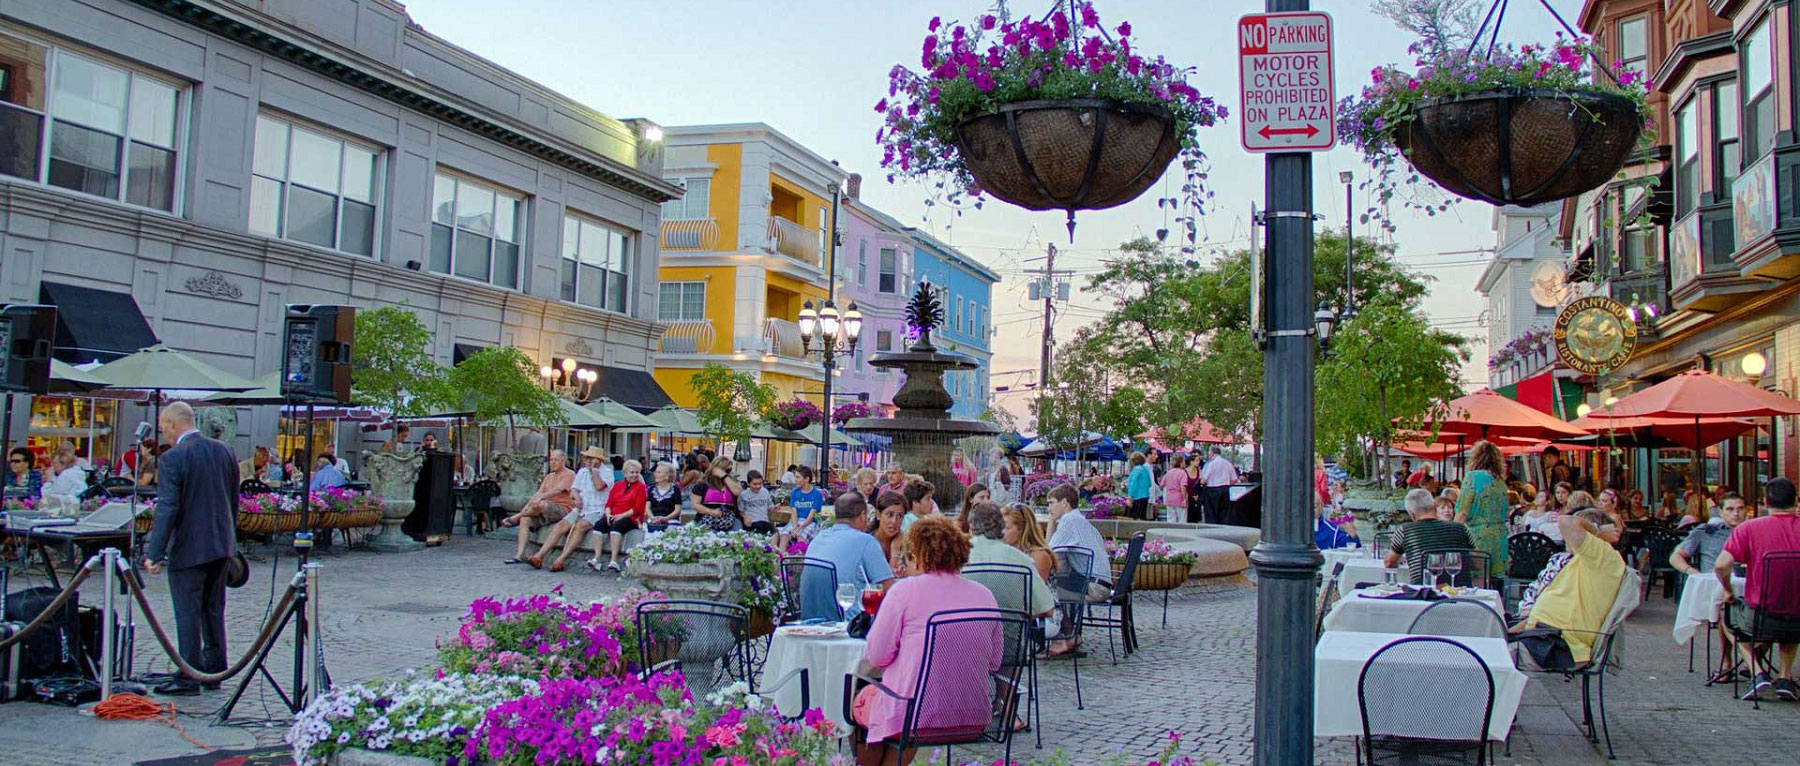 Outdoor Dining at Depasqualre Square on Federal Hill - Providence, RI